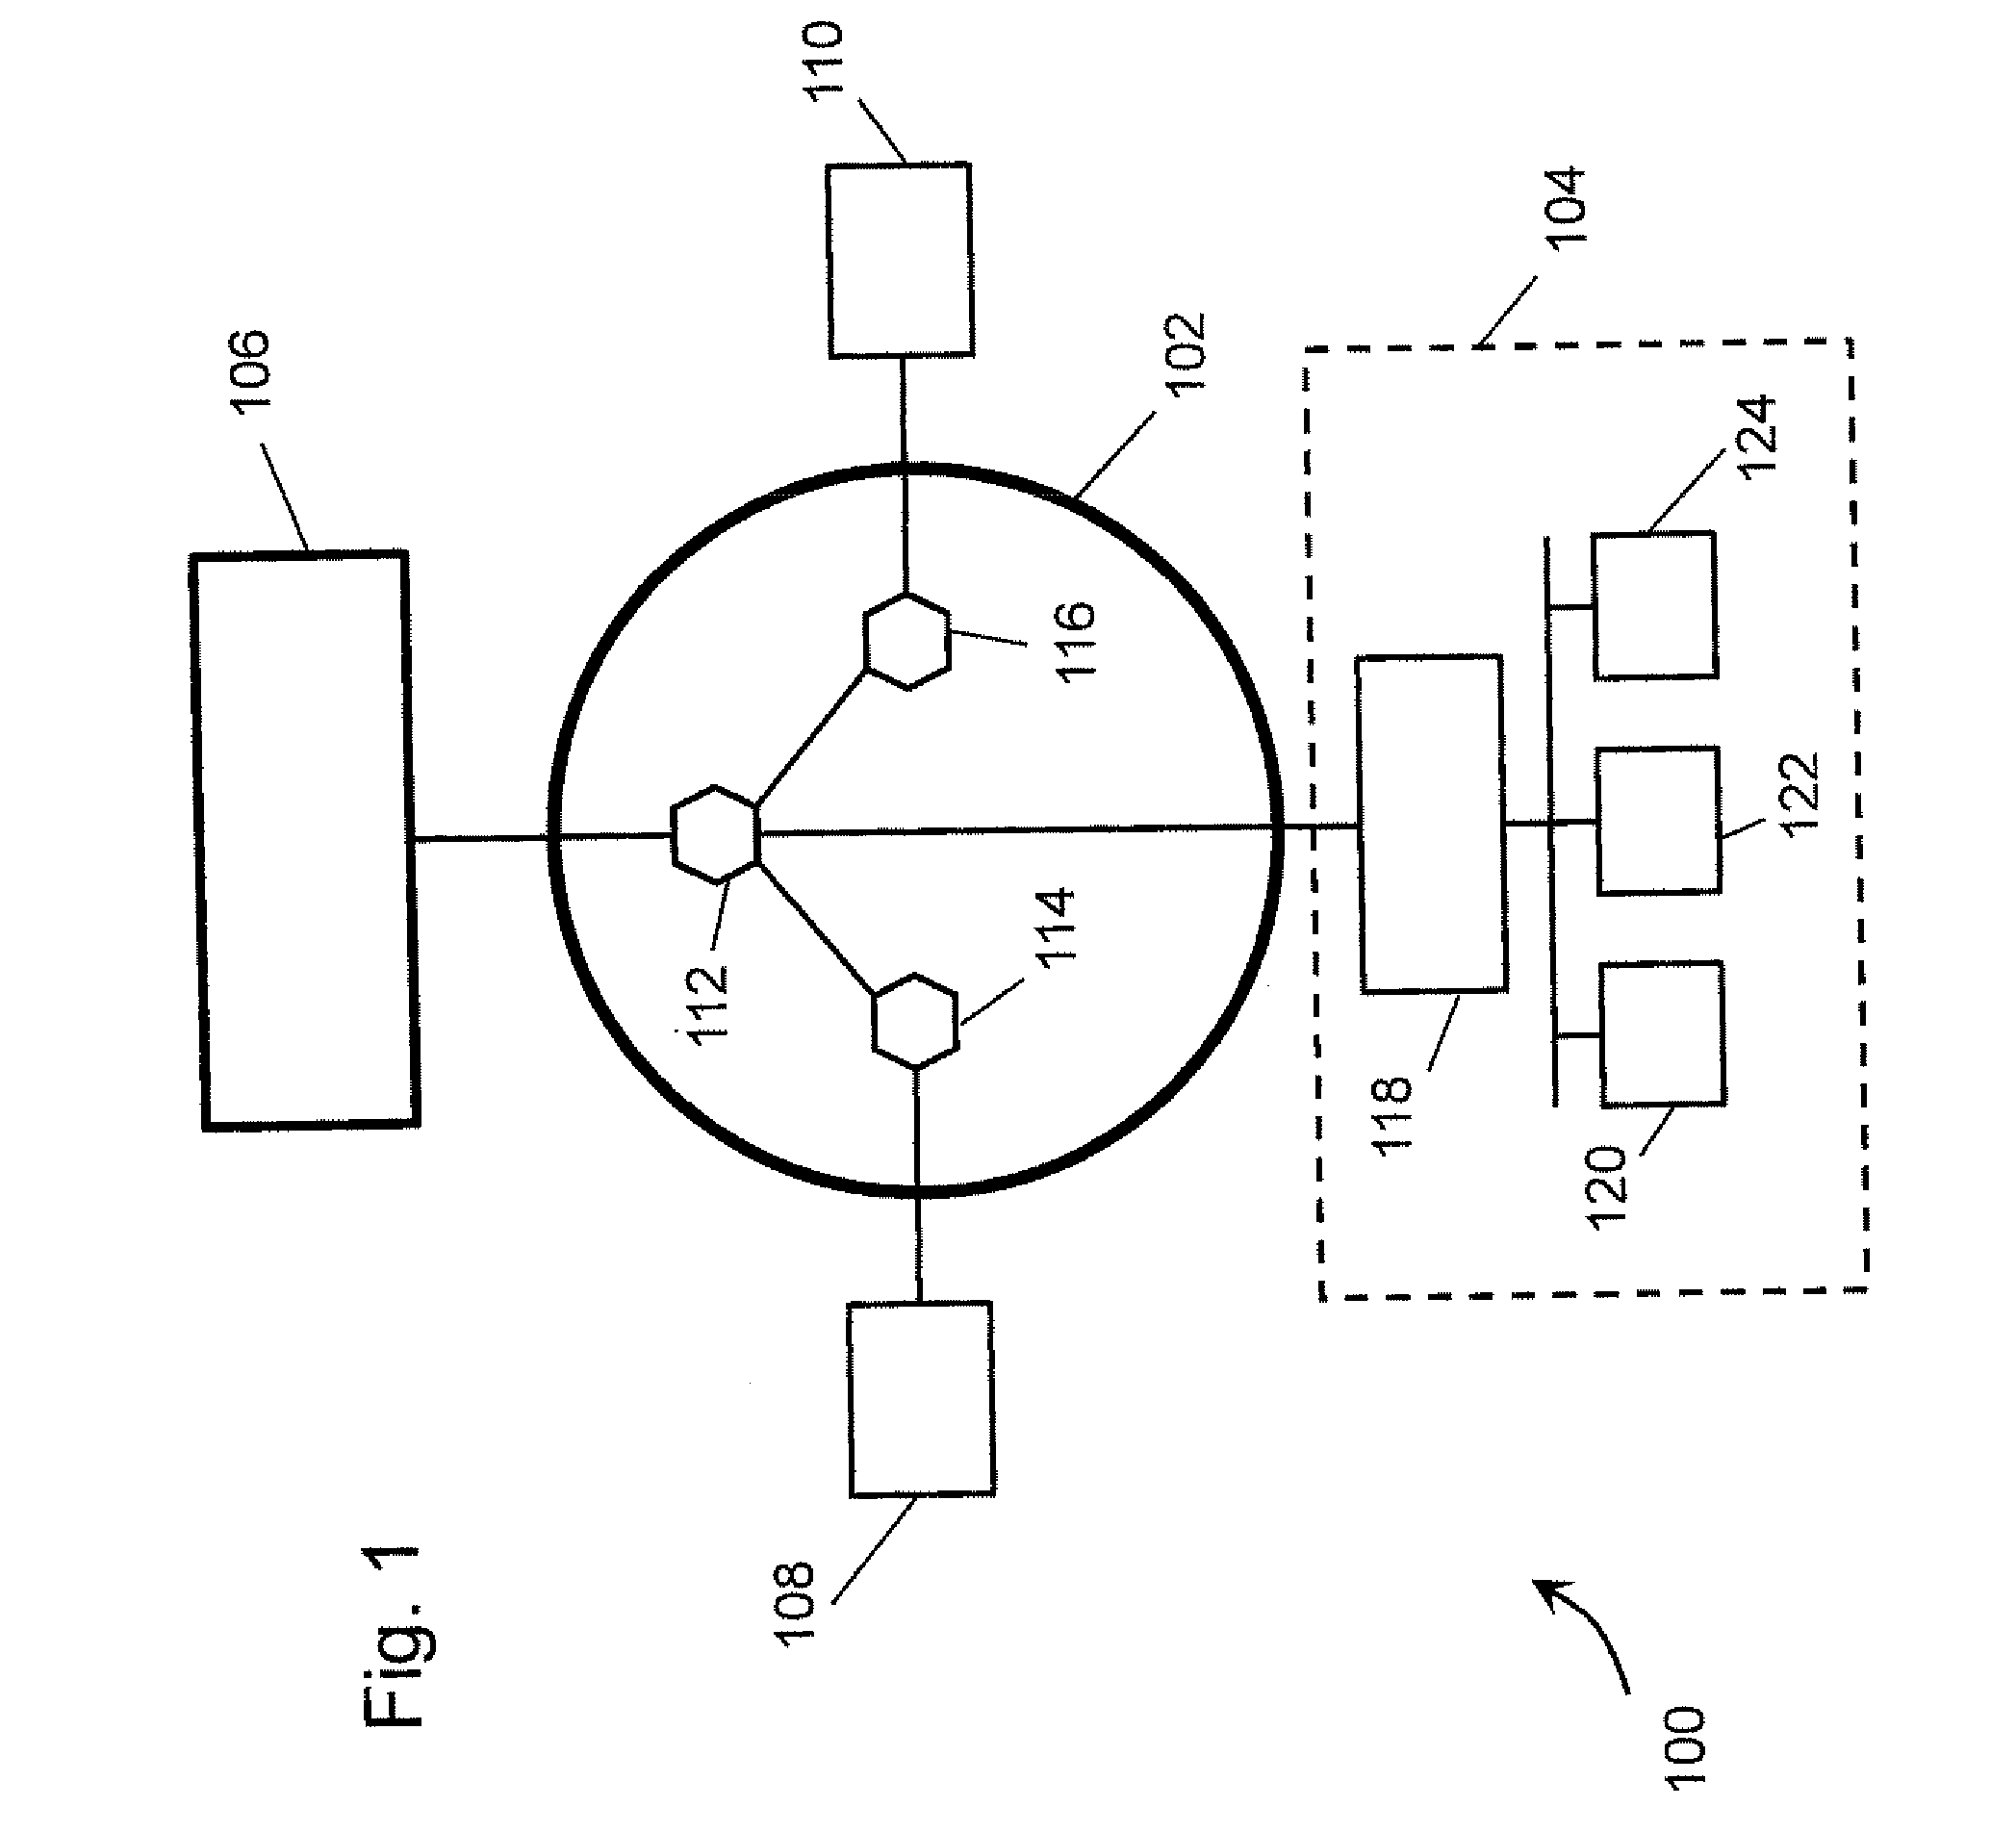 Method and Apparatus for Network Monitoring of Communications Networks